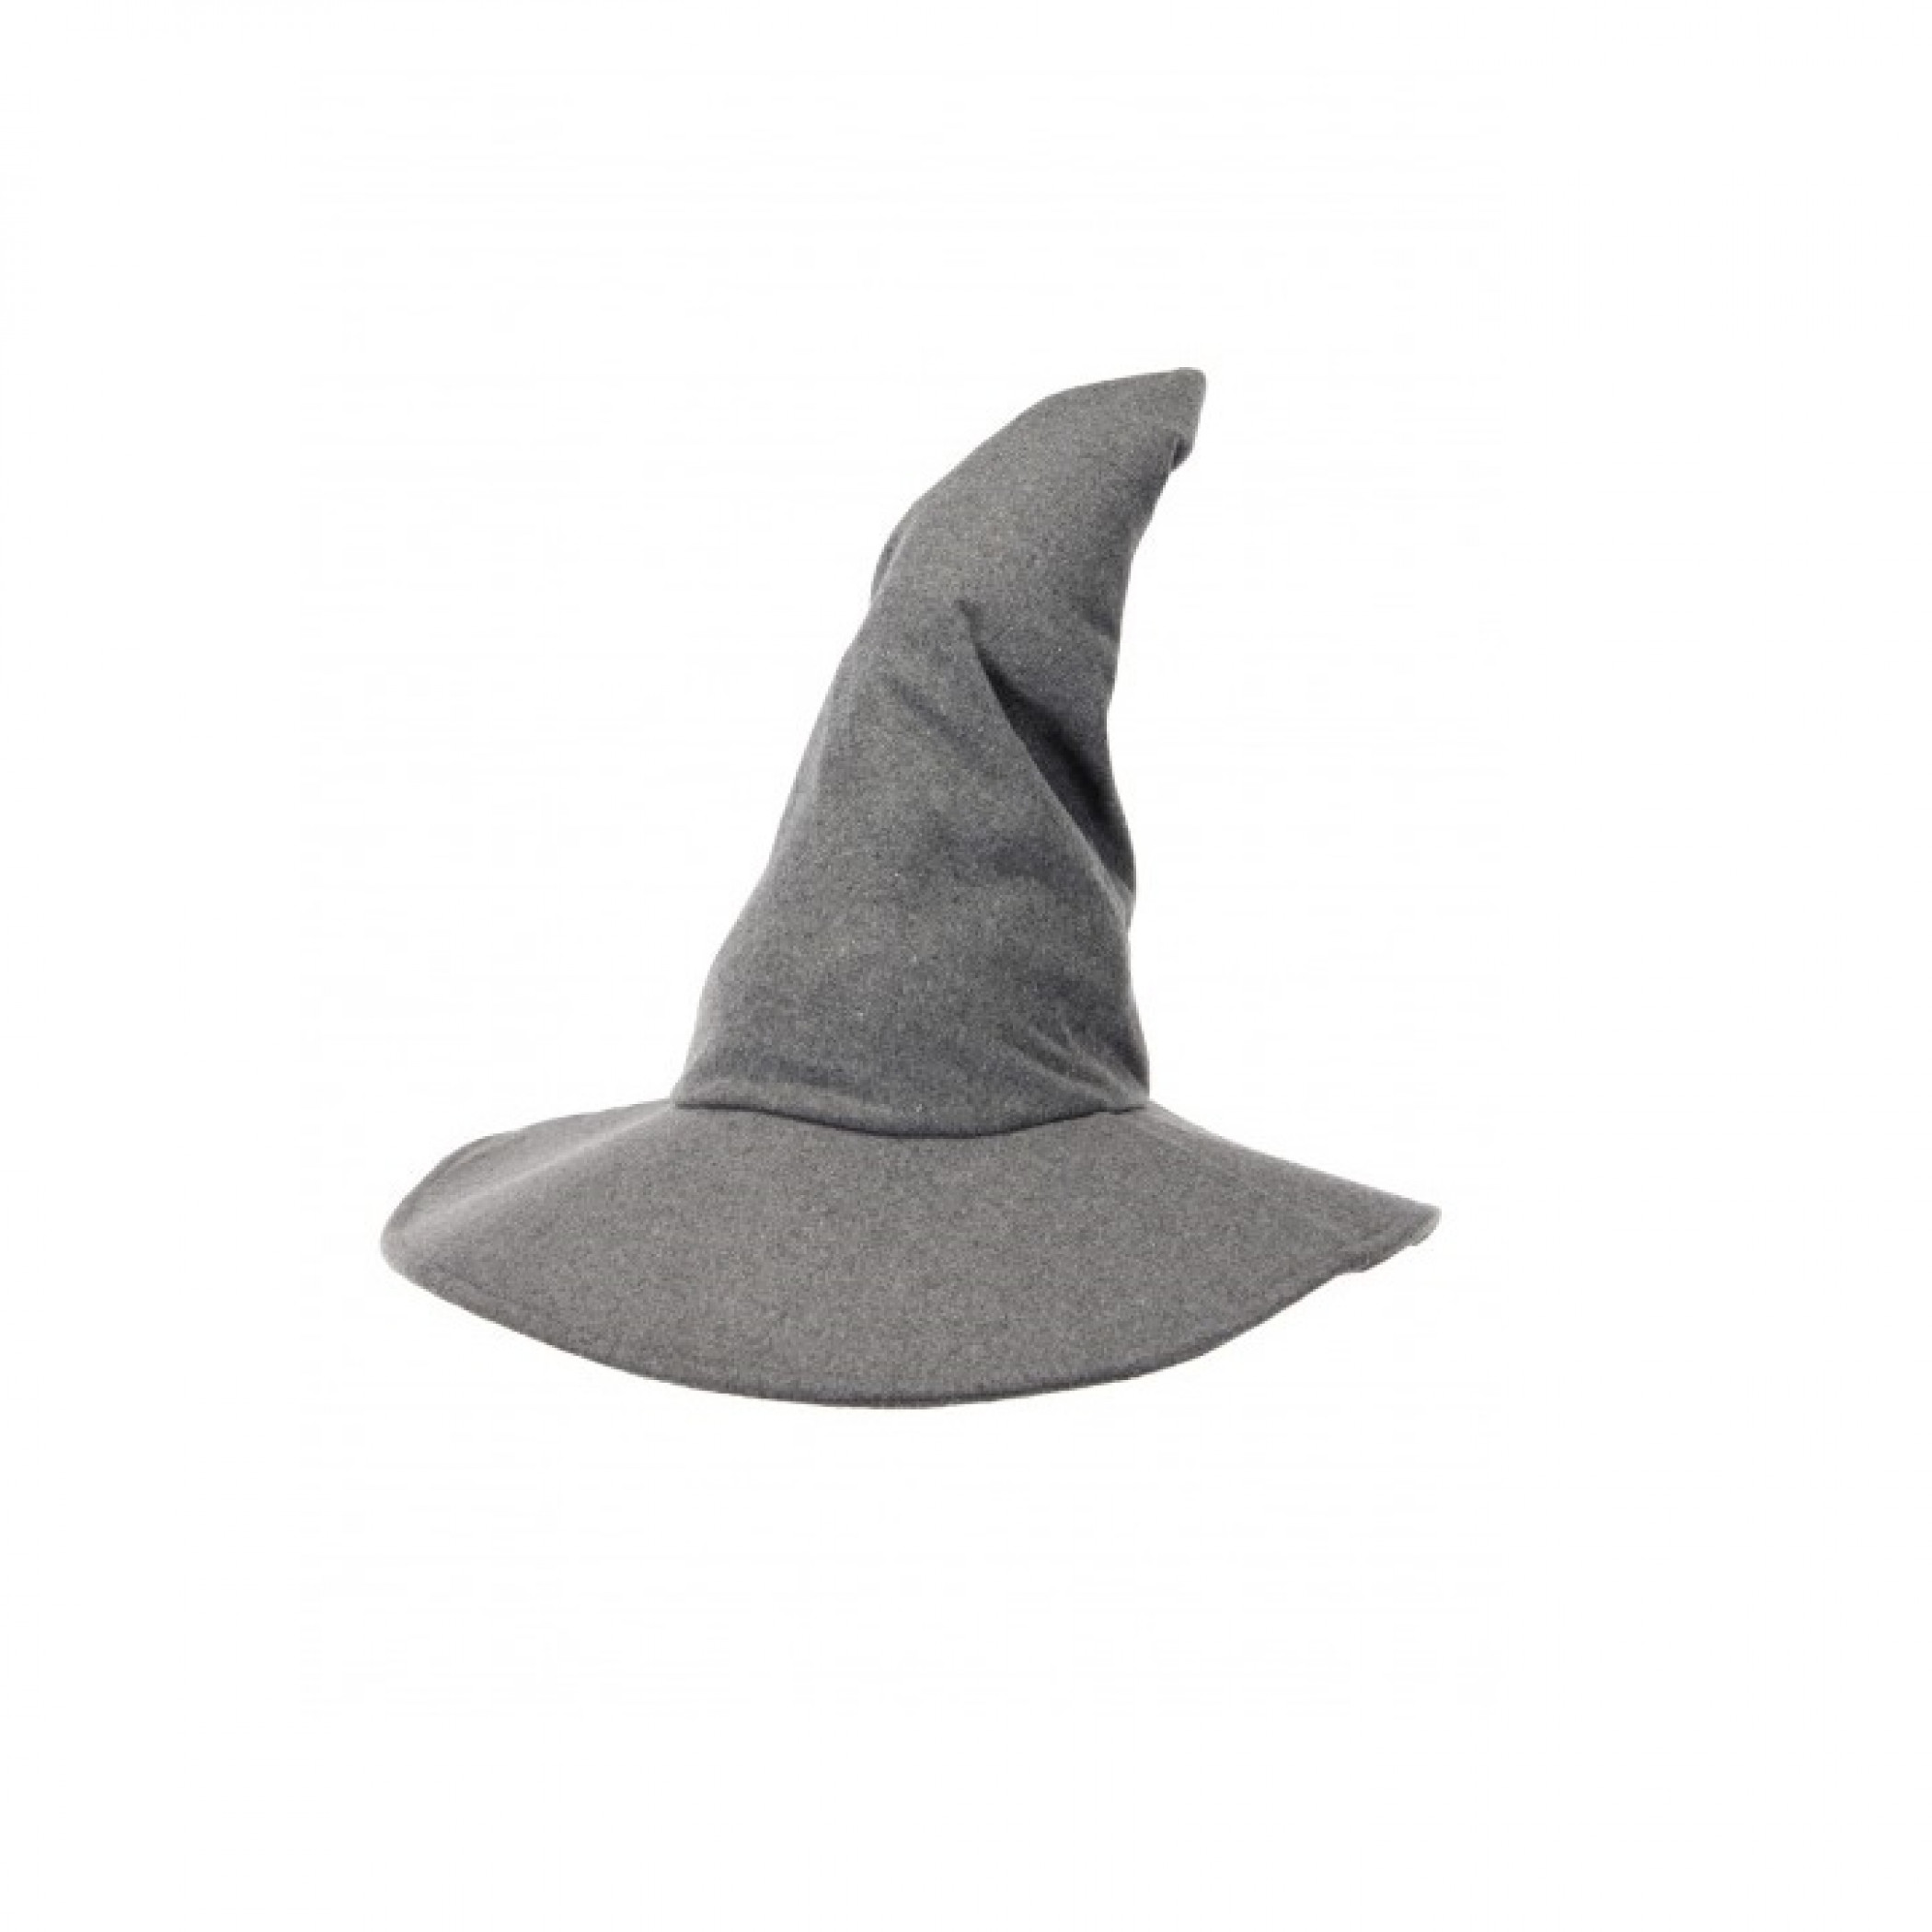 Lord of the Rings Gandalf Plush Hat